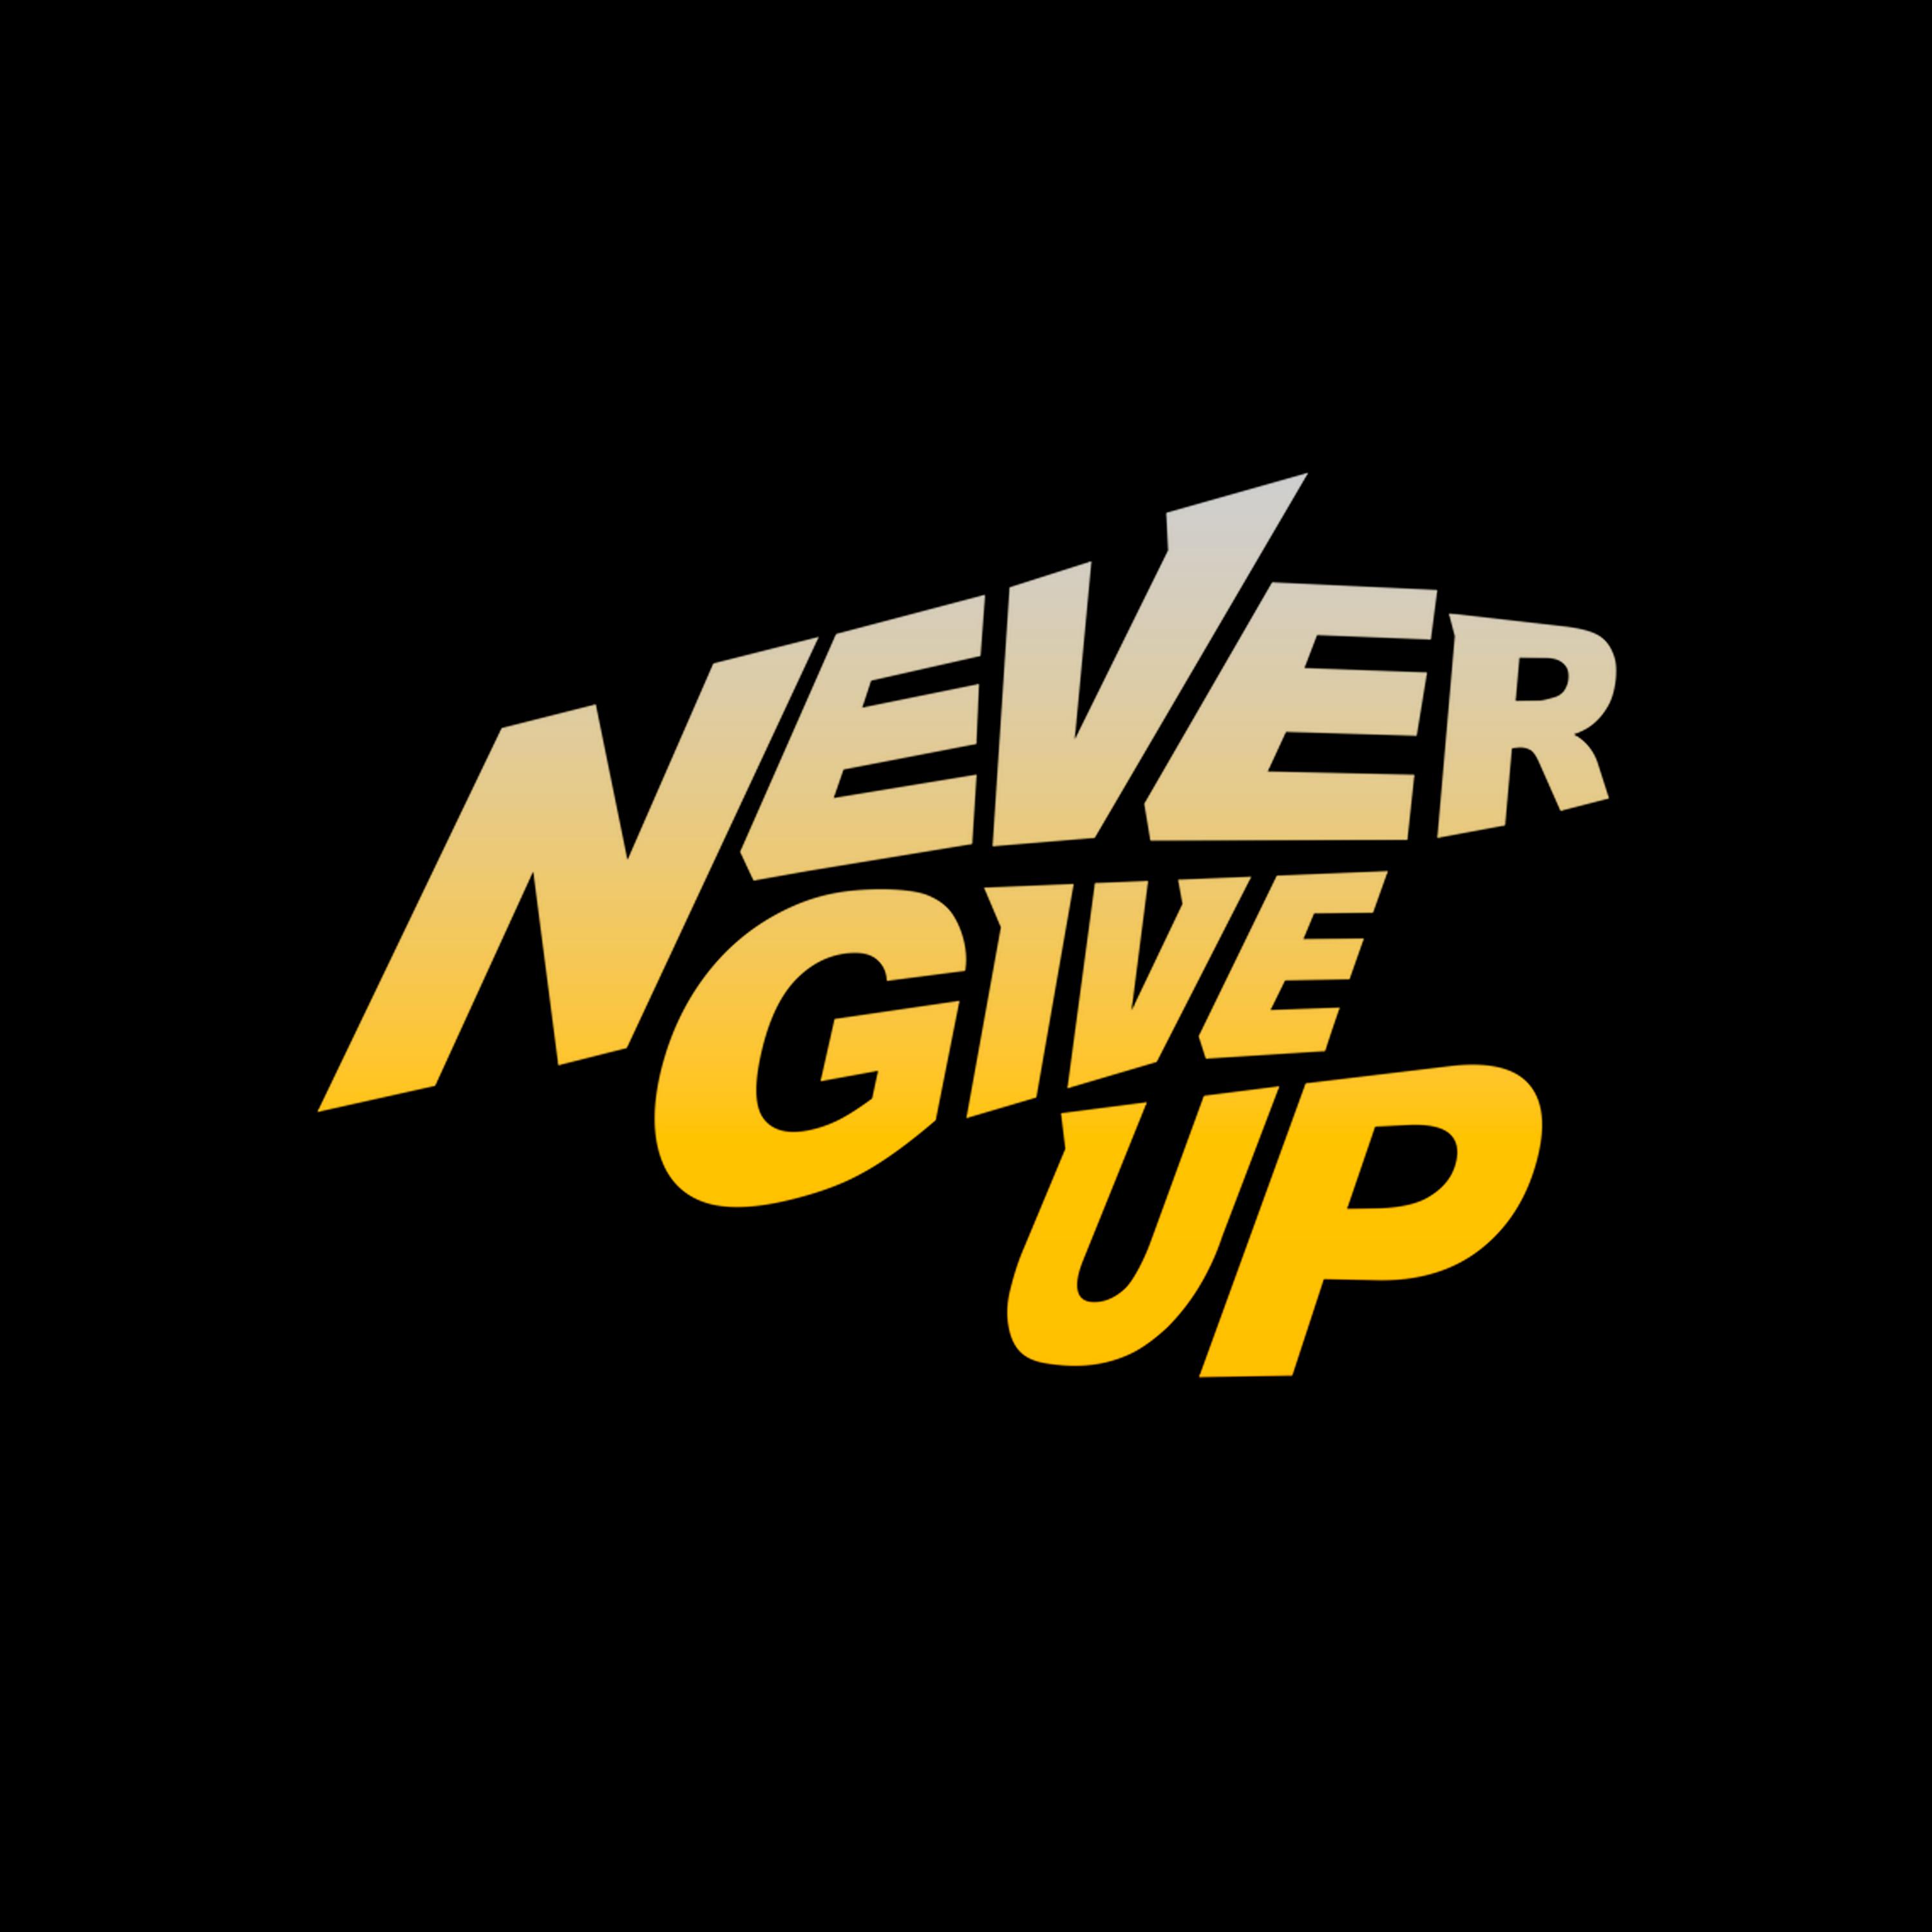 Постер альбома NEVER GIVE UP